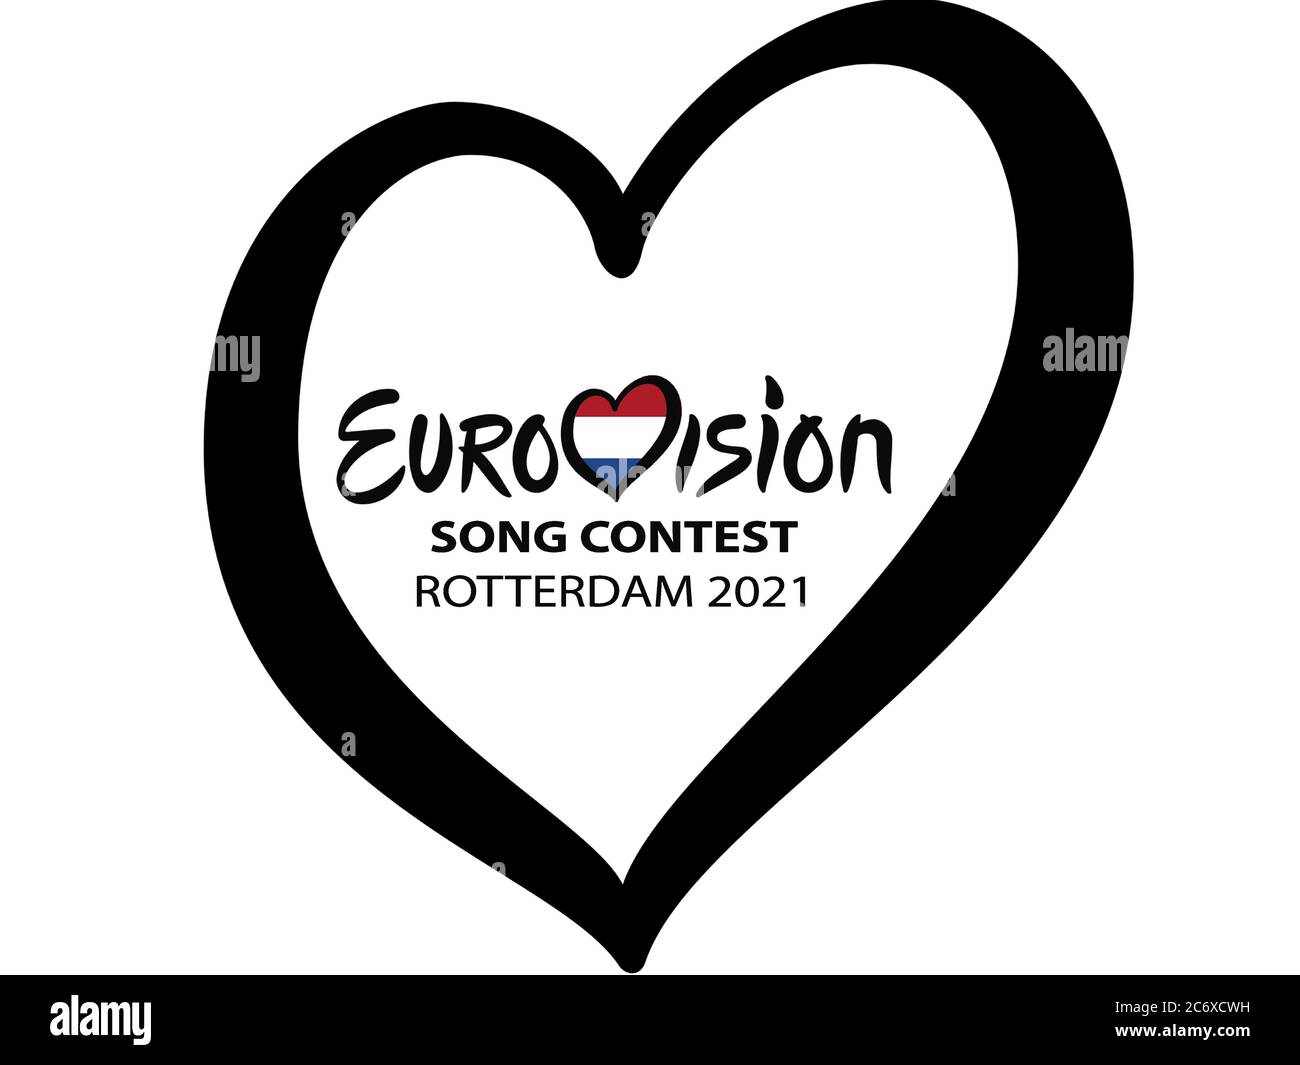 Eurovision 2021. Text Song Contest Rotterdam 2021 Eurovision Heart on Netherland Flag on white background. Stock Vector